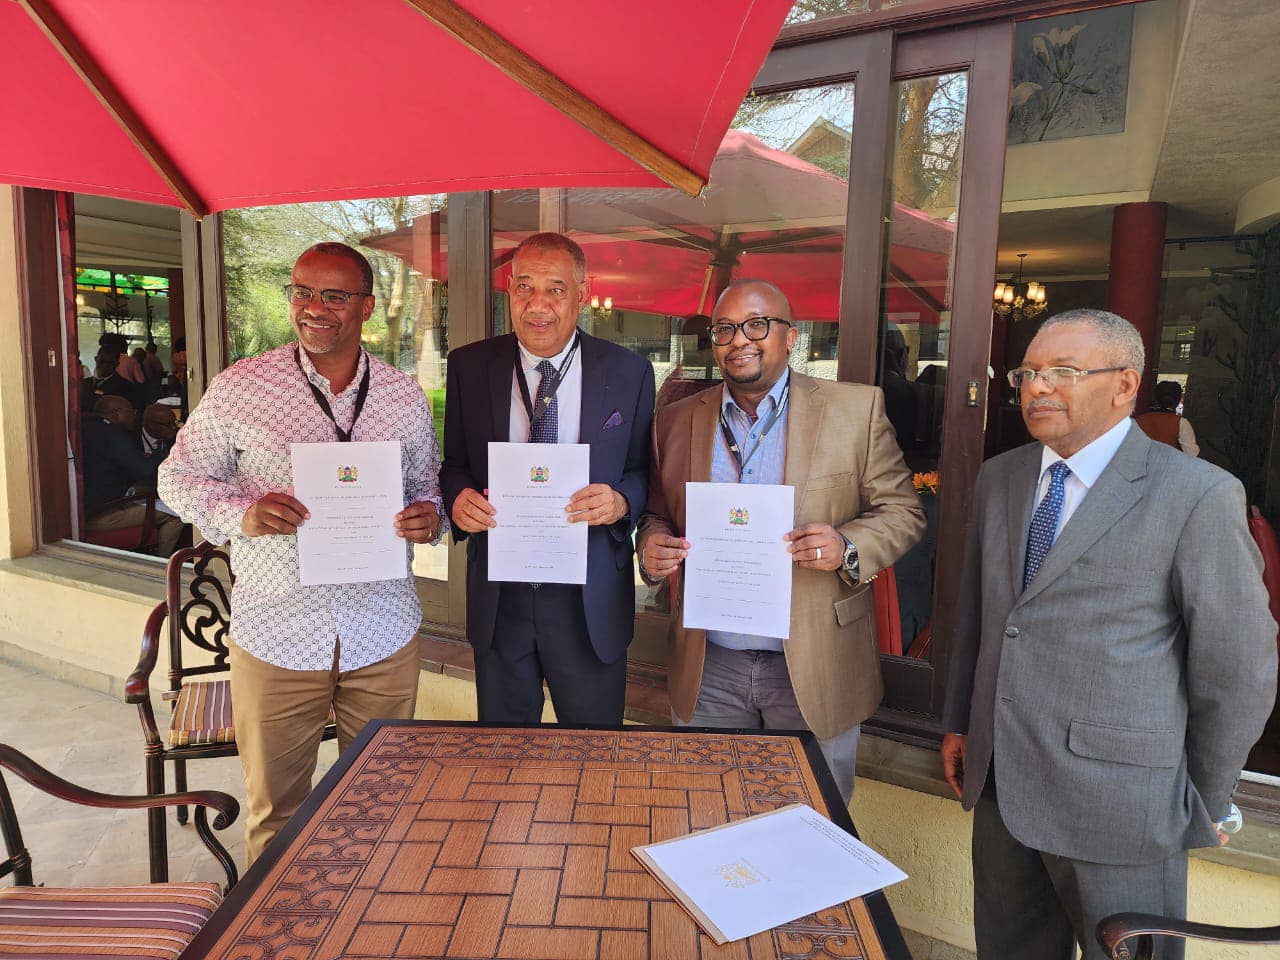 LAMU COUNTY SIGNS AN MoU TO CONSTRUCT 5,000 AFFORDABLE HOUSES IN 5 YEARS.